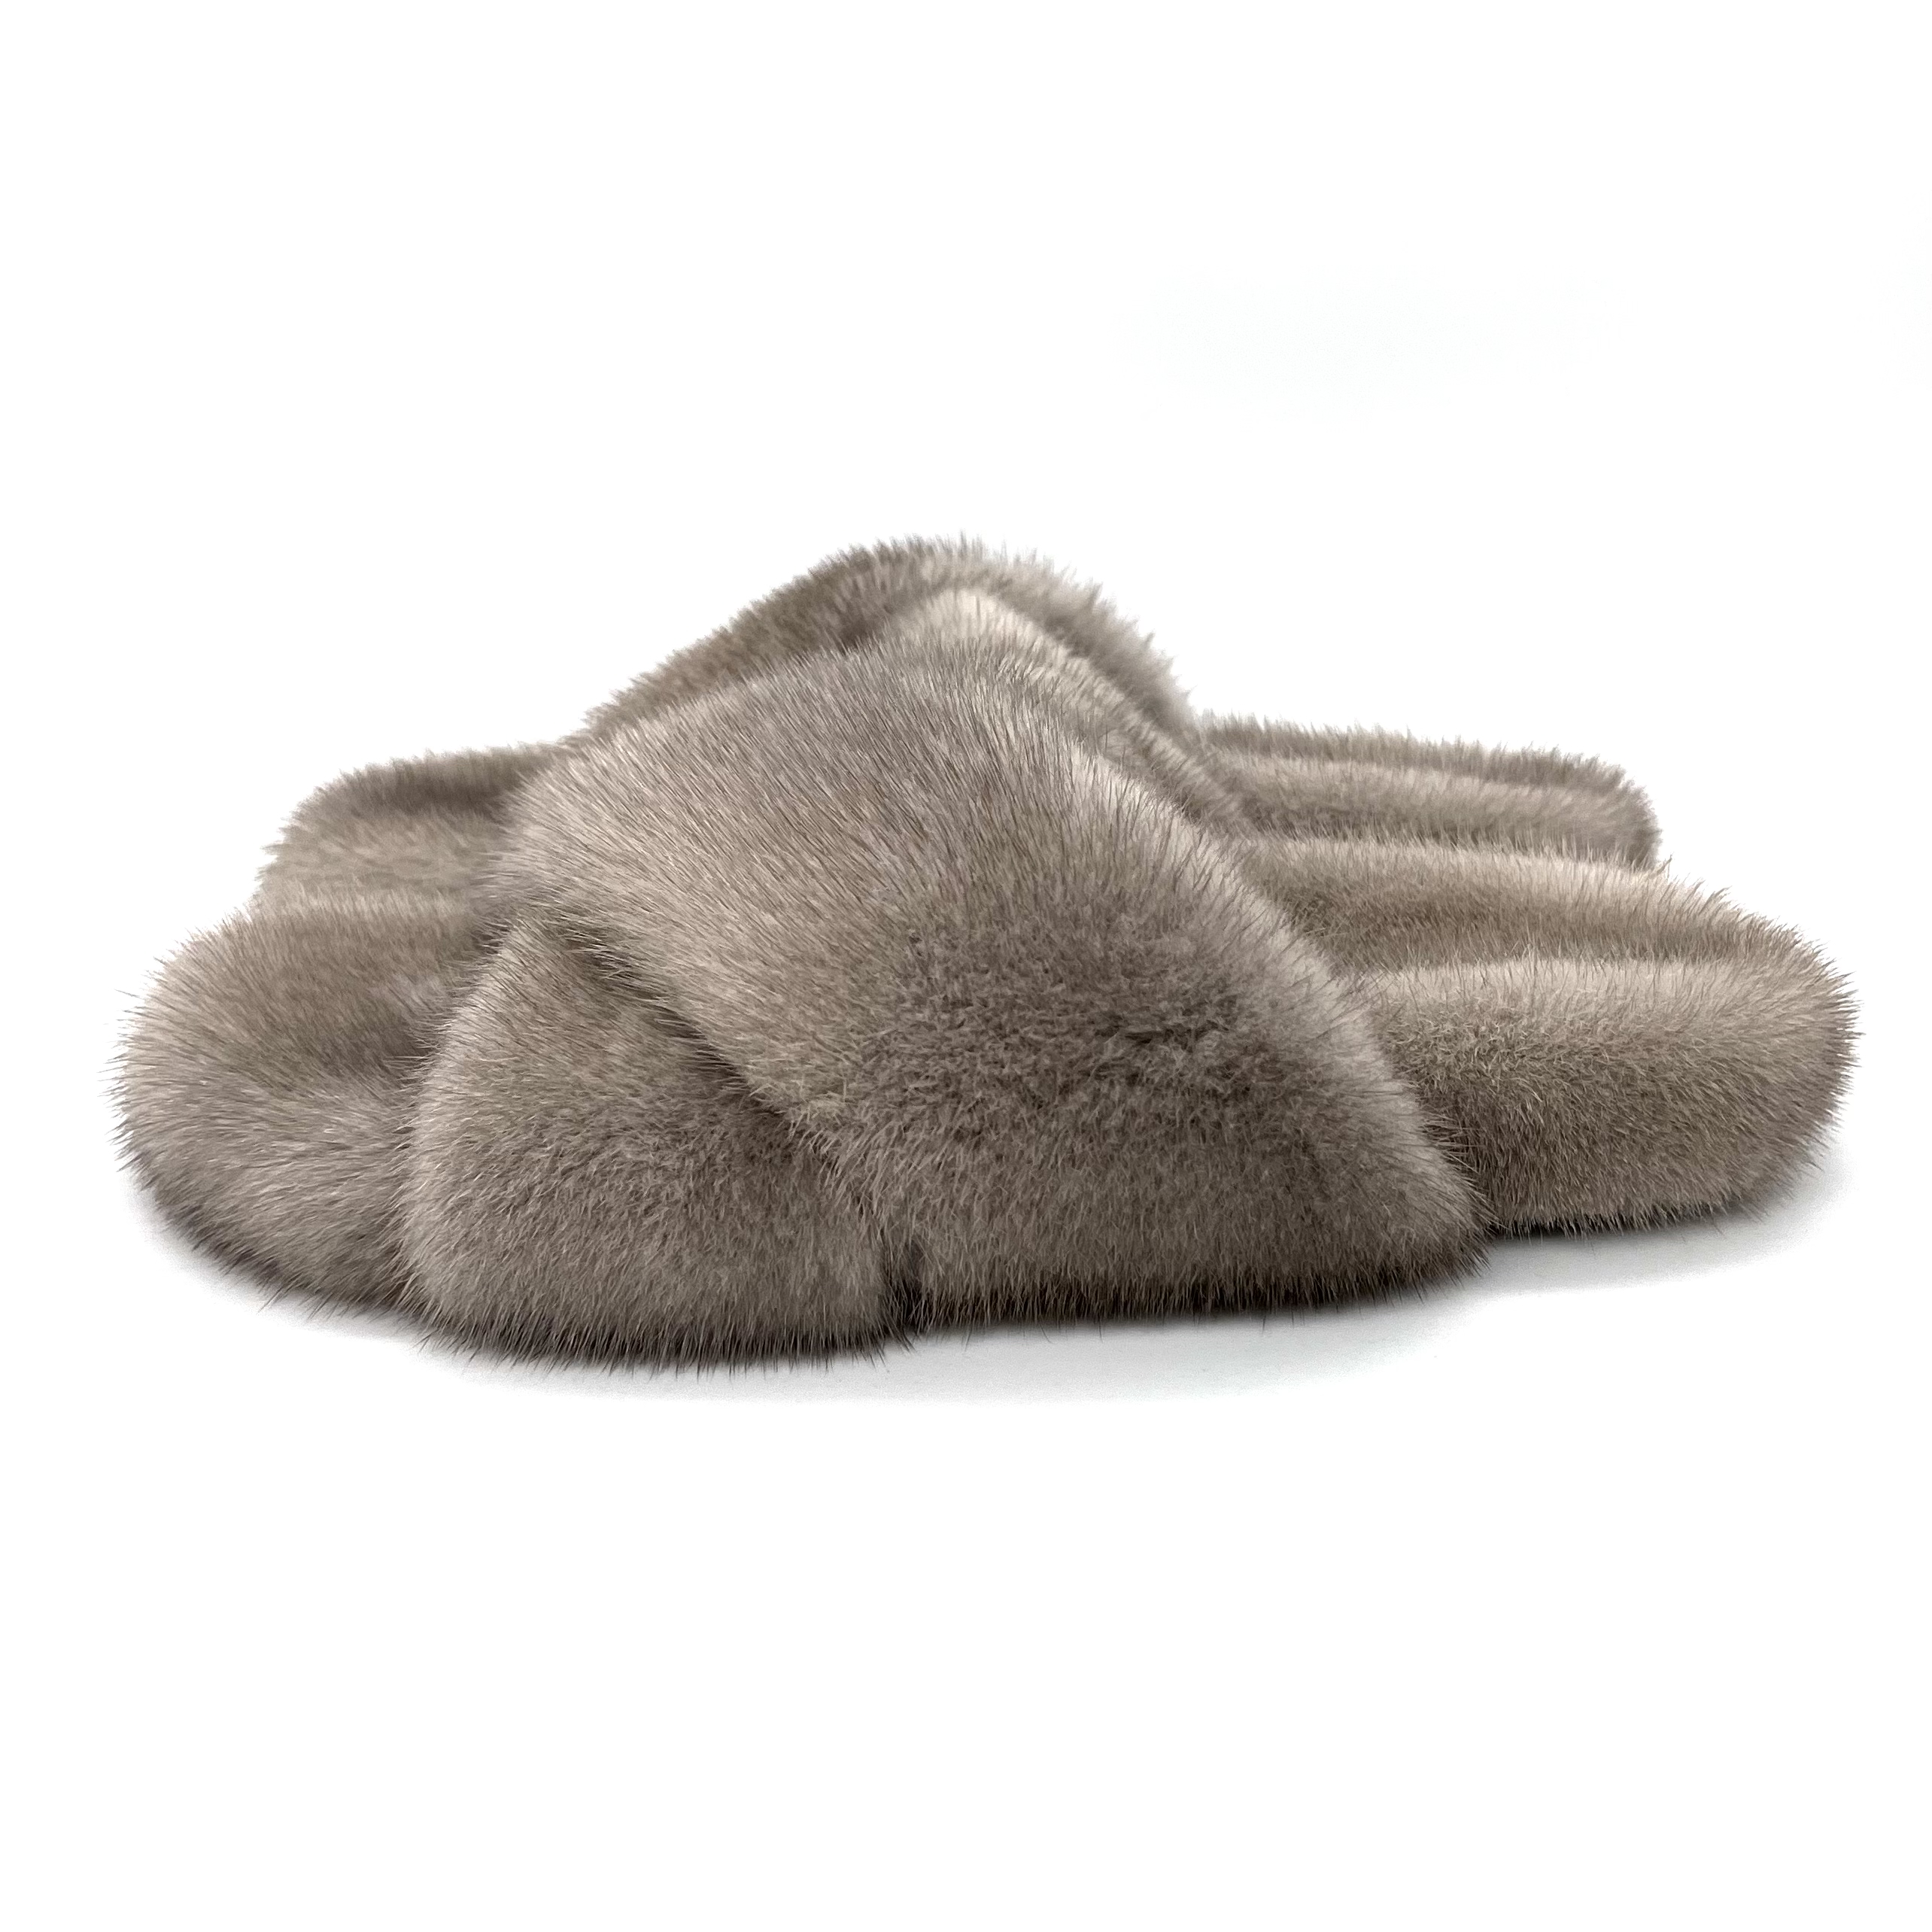 HT1128 New Korean Slippers Winter Soft Cozy Plush Thick-Soled Fashion REAL Mink Fur Women Cross Slippers